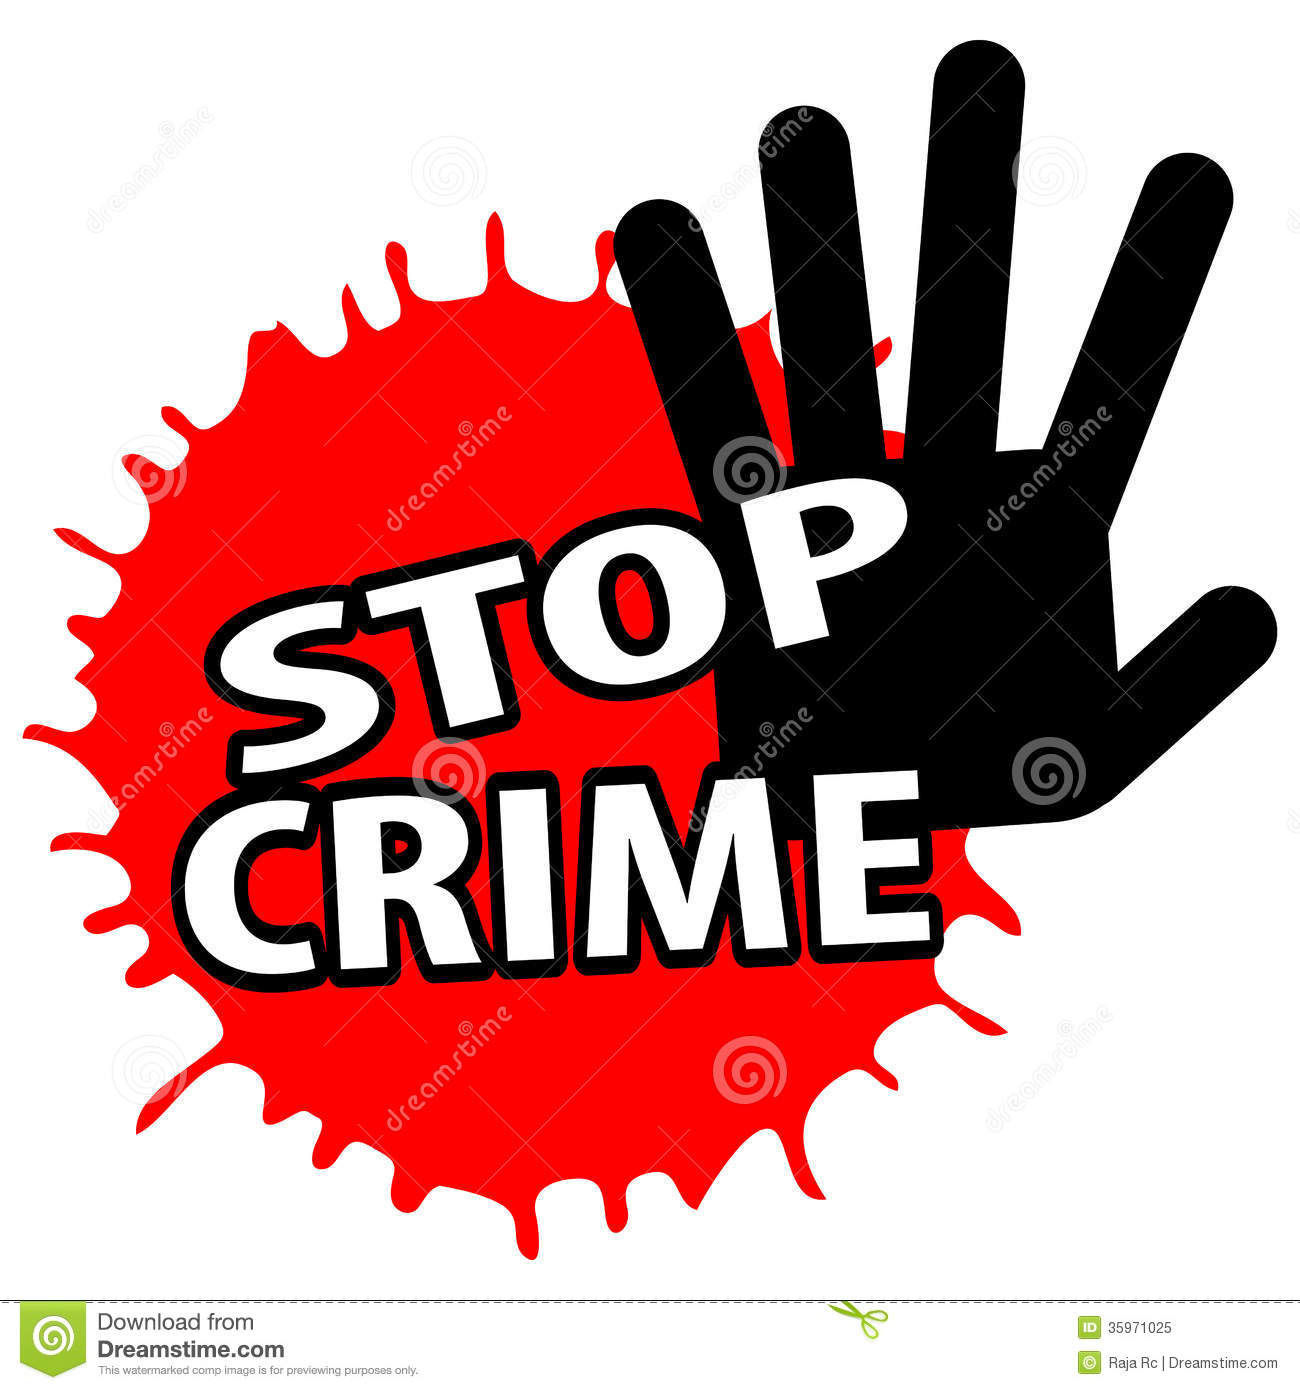 Stop Crime Royalty Free Stock Photo   Image  35971025